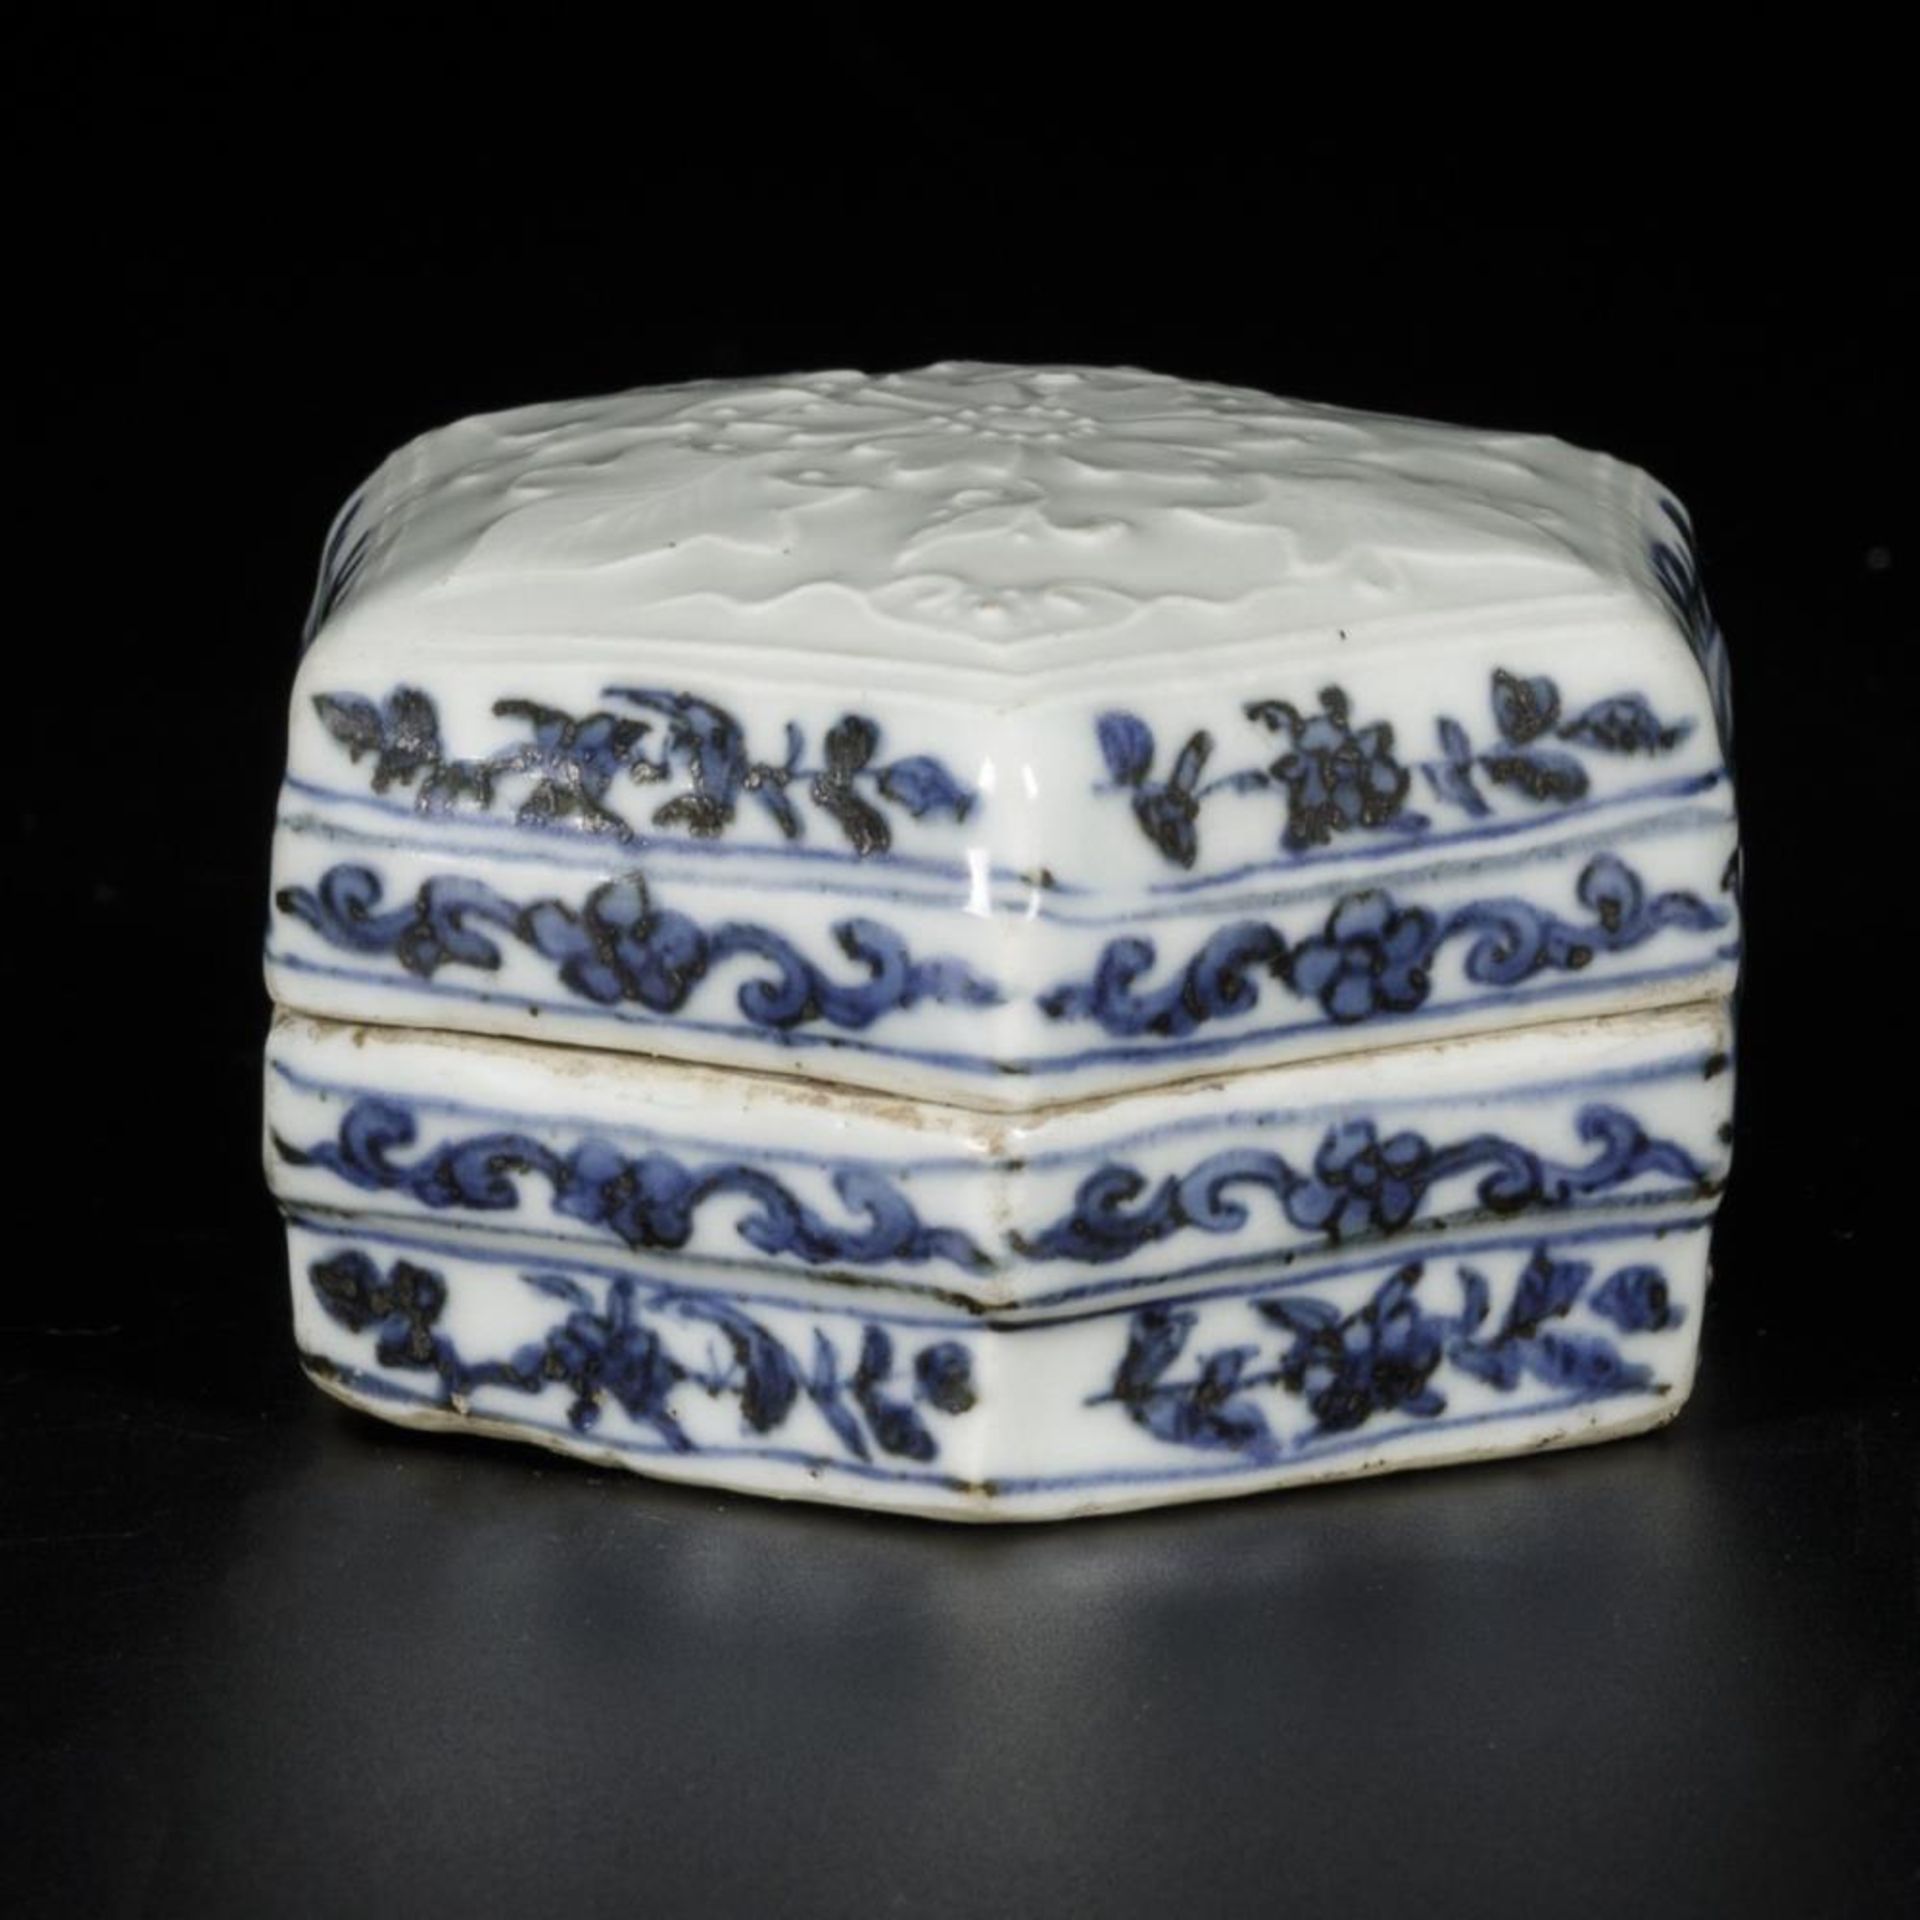 A porcelain lidded box with floral decor, China, Ming or later.